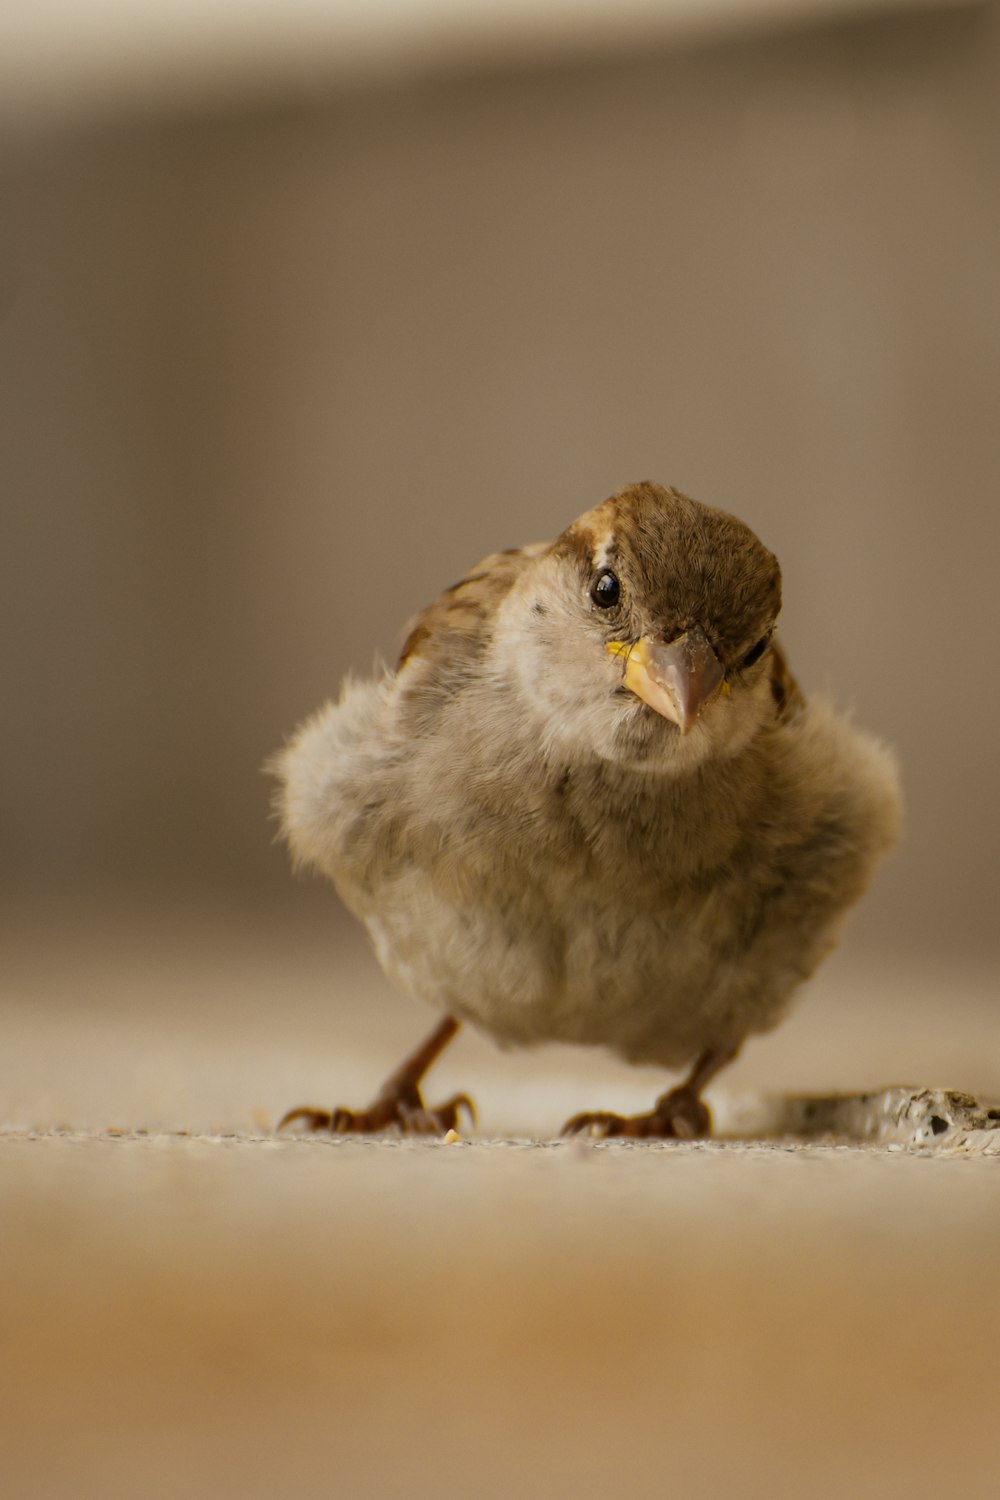 a small bird sitting on the ground looking at the camera